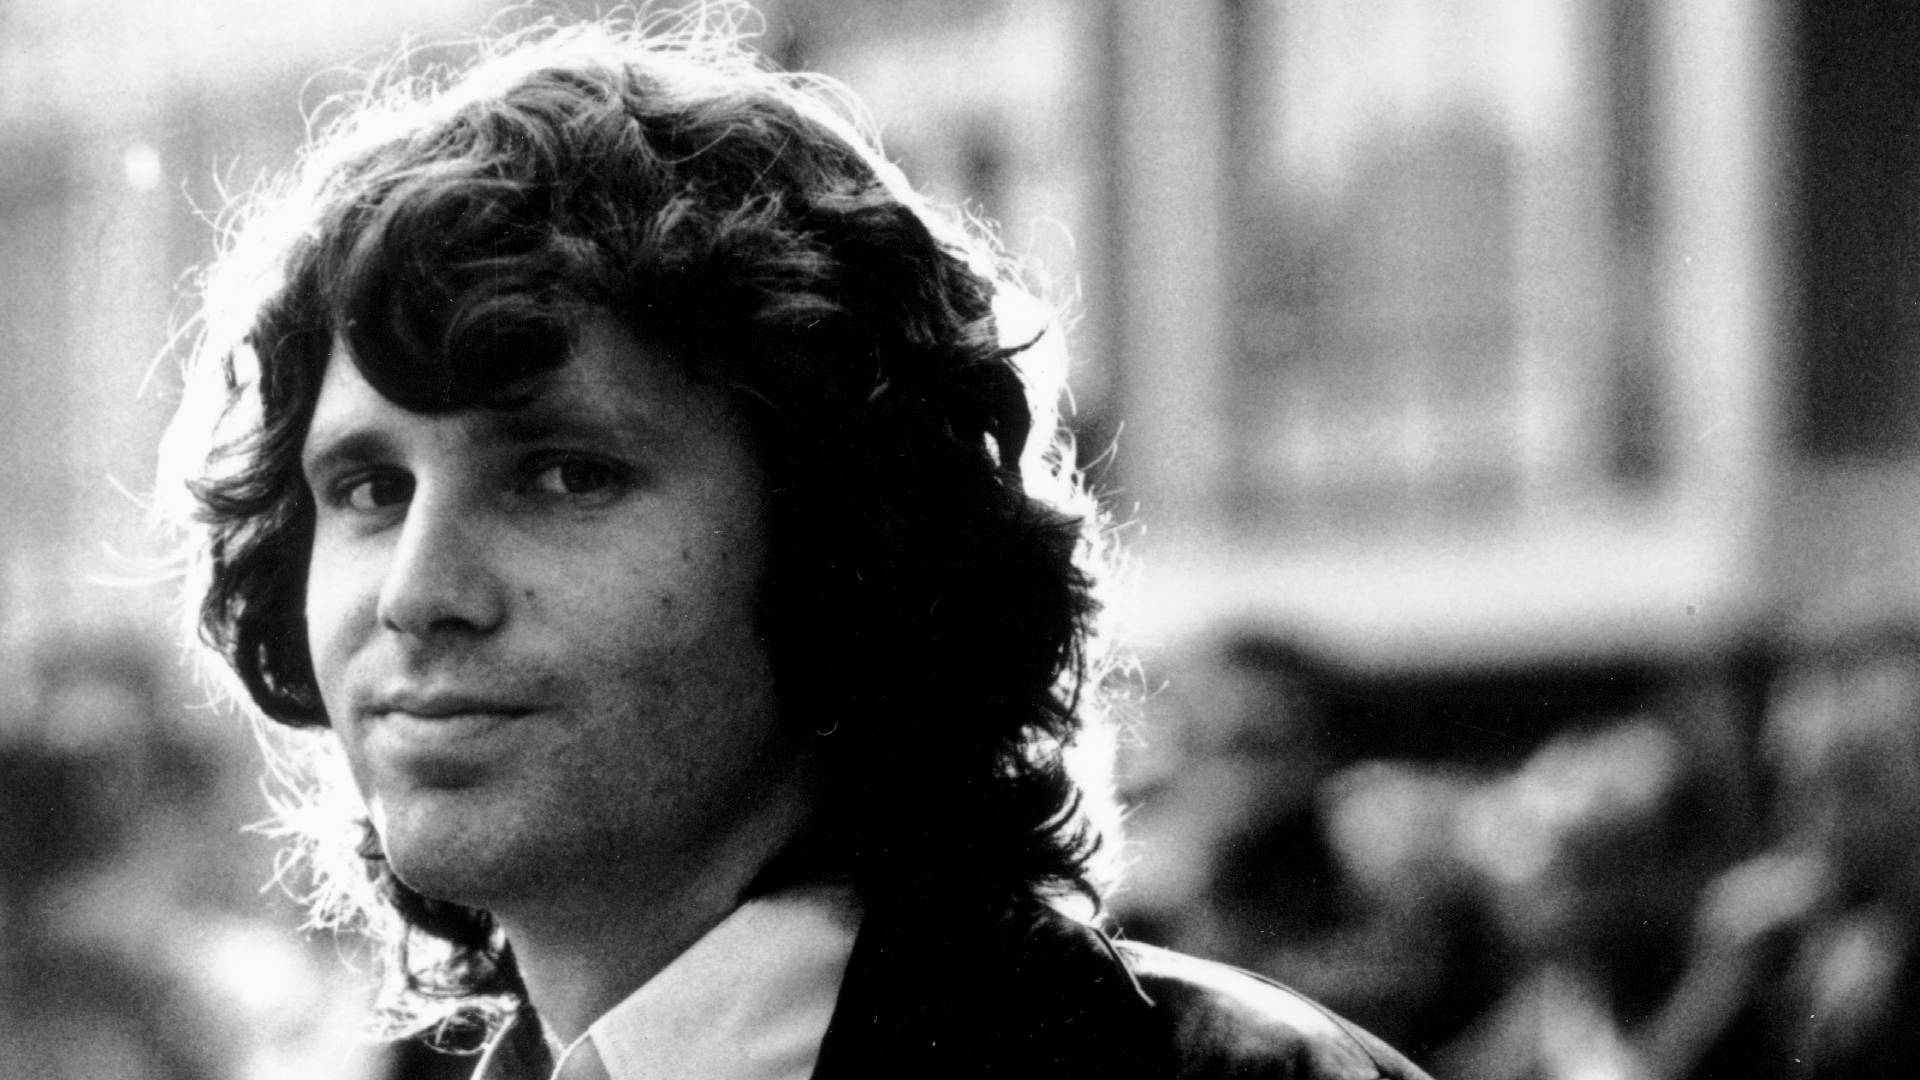 Legendary Jim Morrison With A Charming Smile